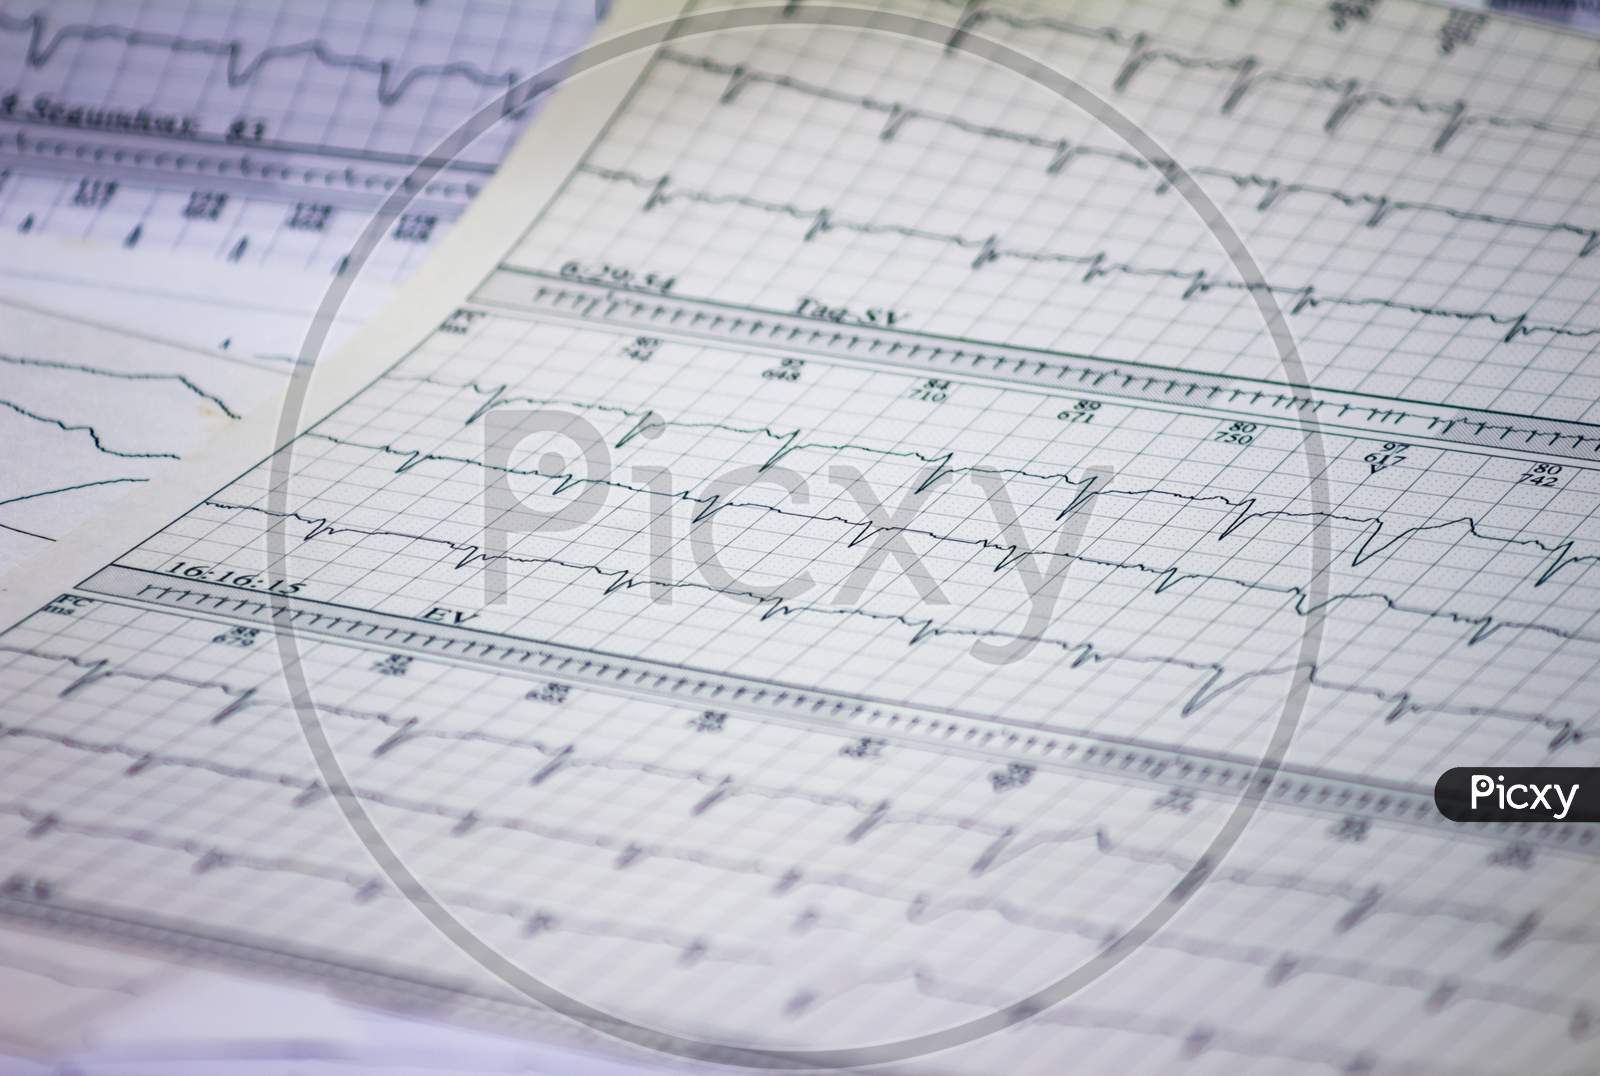 Tracing Of Electrocardiograms On Graph Paper. Records Of Heart Activity. Heartbeat With Arrhythmia. Selective Focus